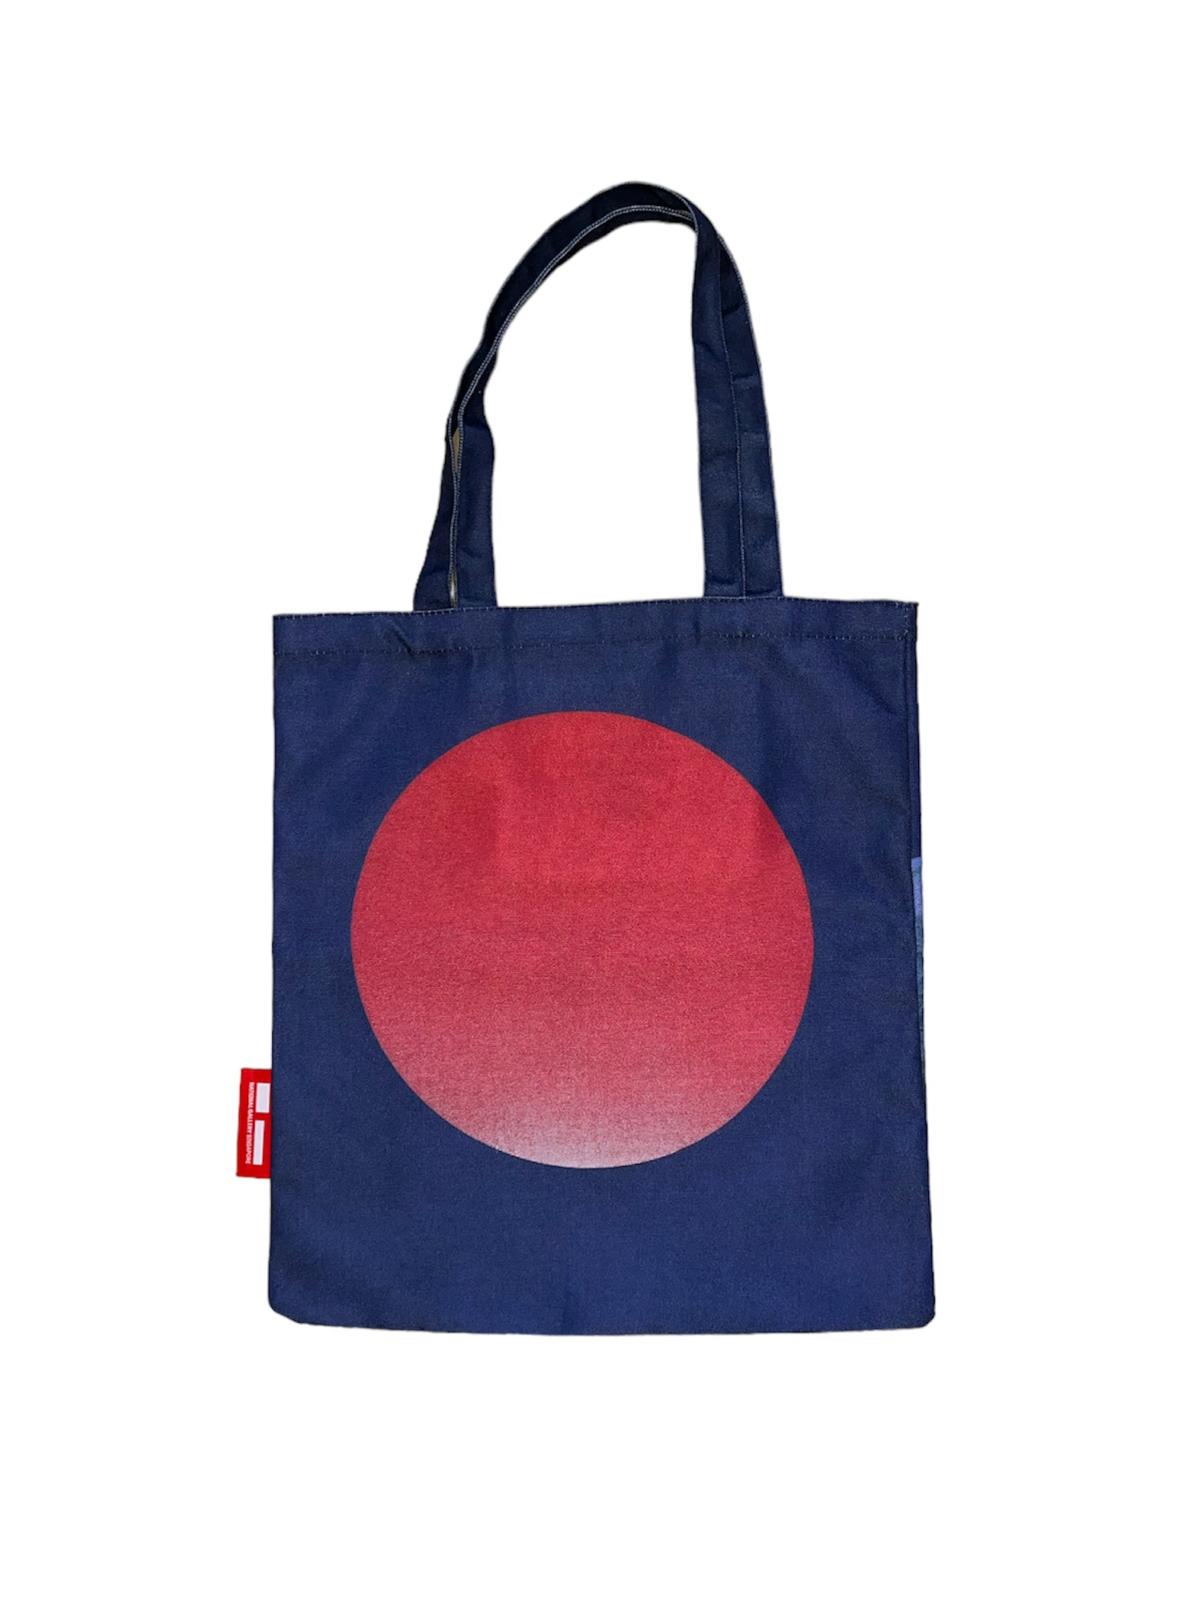 LIU KUO-SUNG TOTE BAG THE COMPOSITION OF DISTANCE NO.15